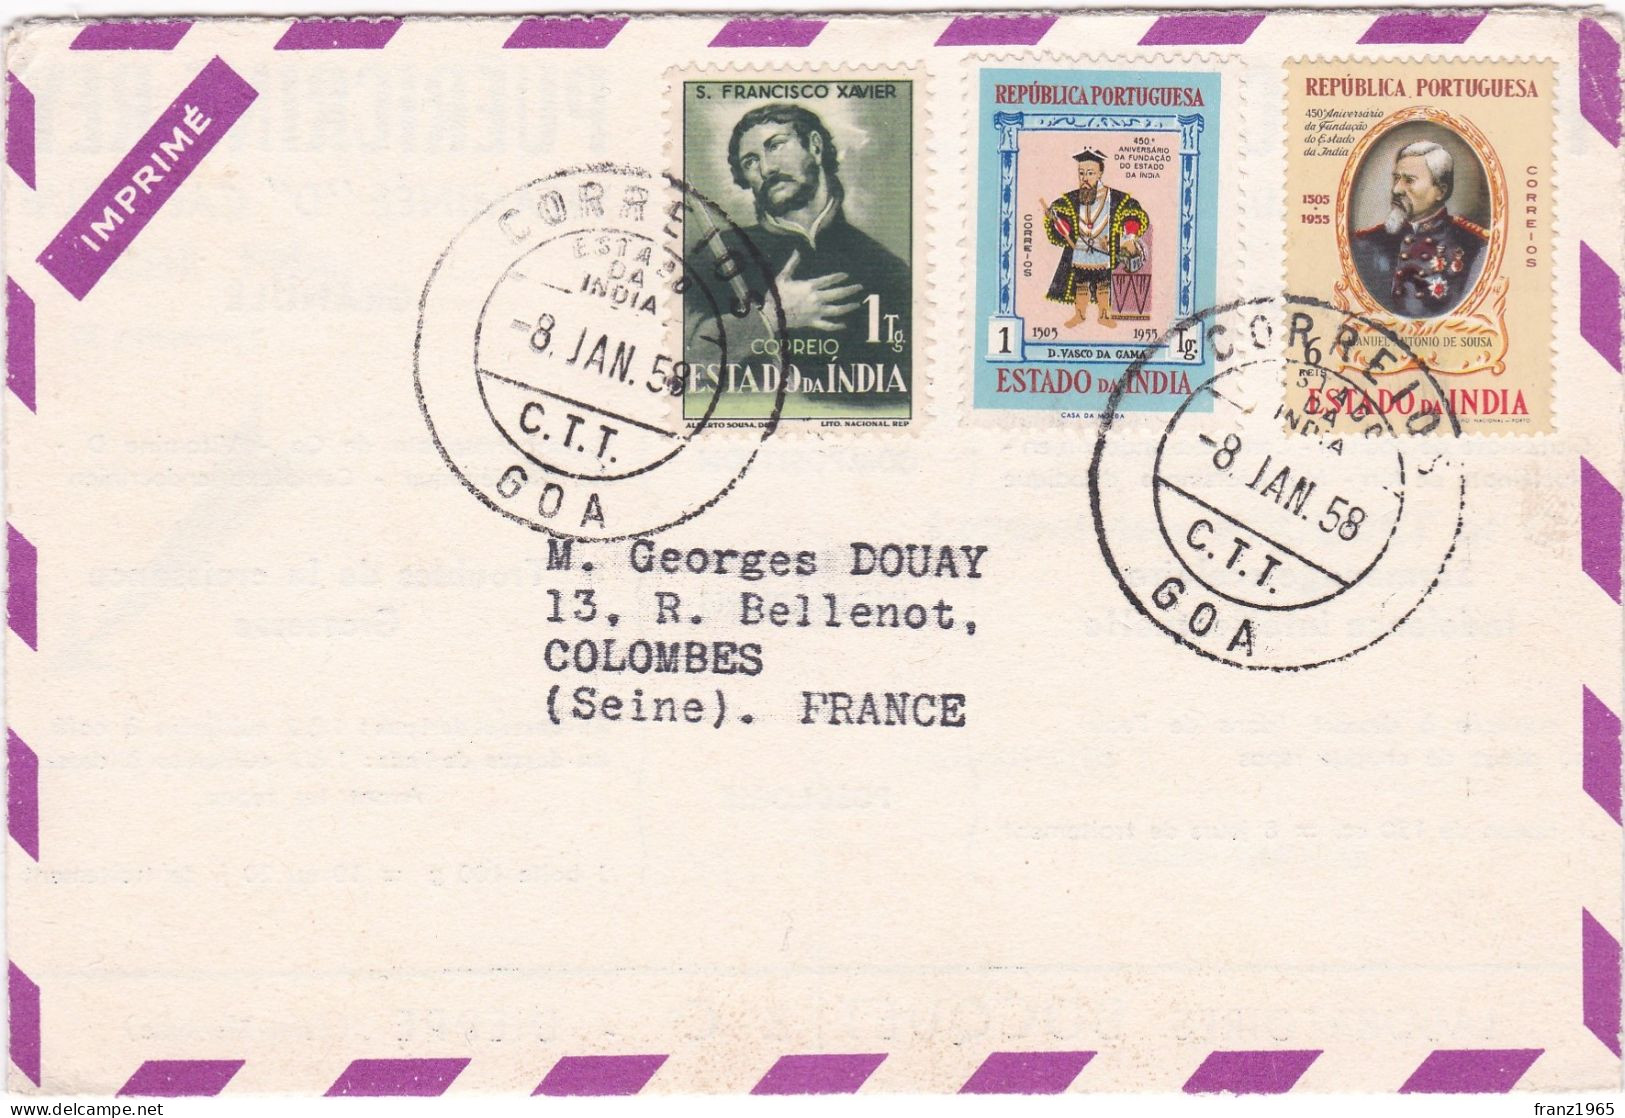 From Goa To France - 1958 - Portuguese India